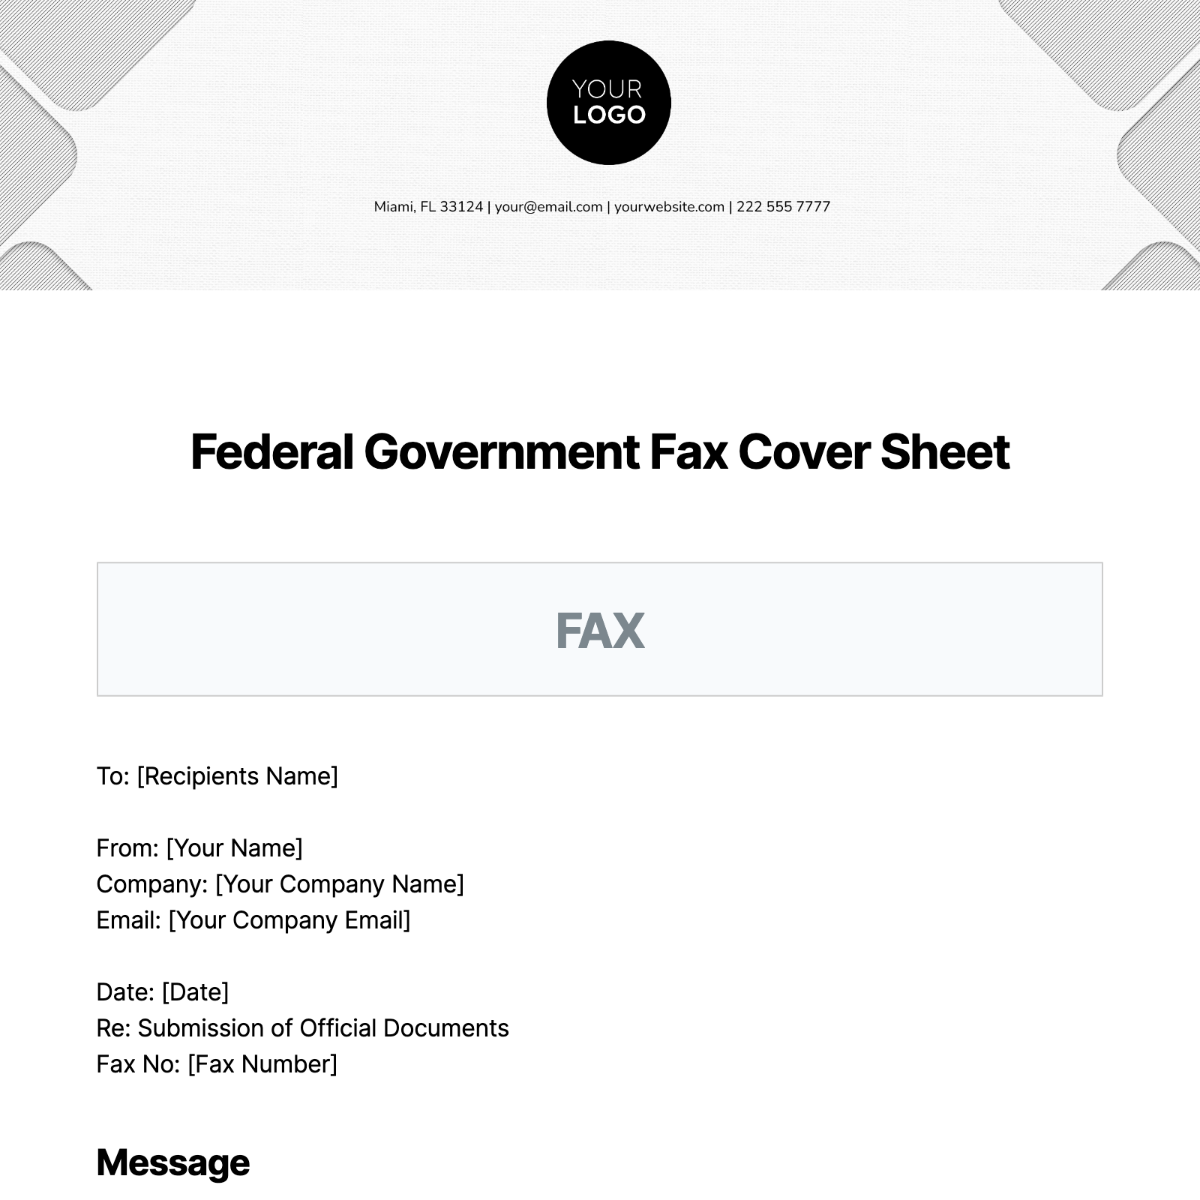 Federal Government Fax Cover Sheet